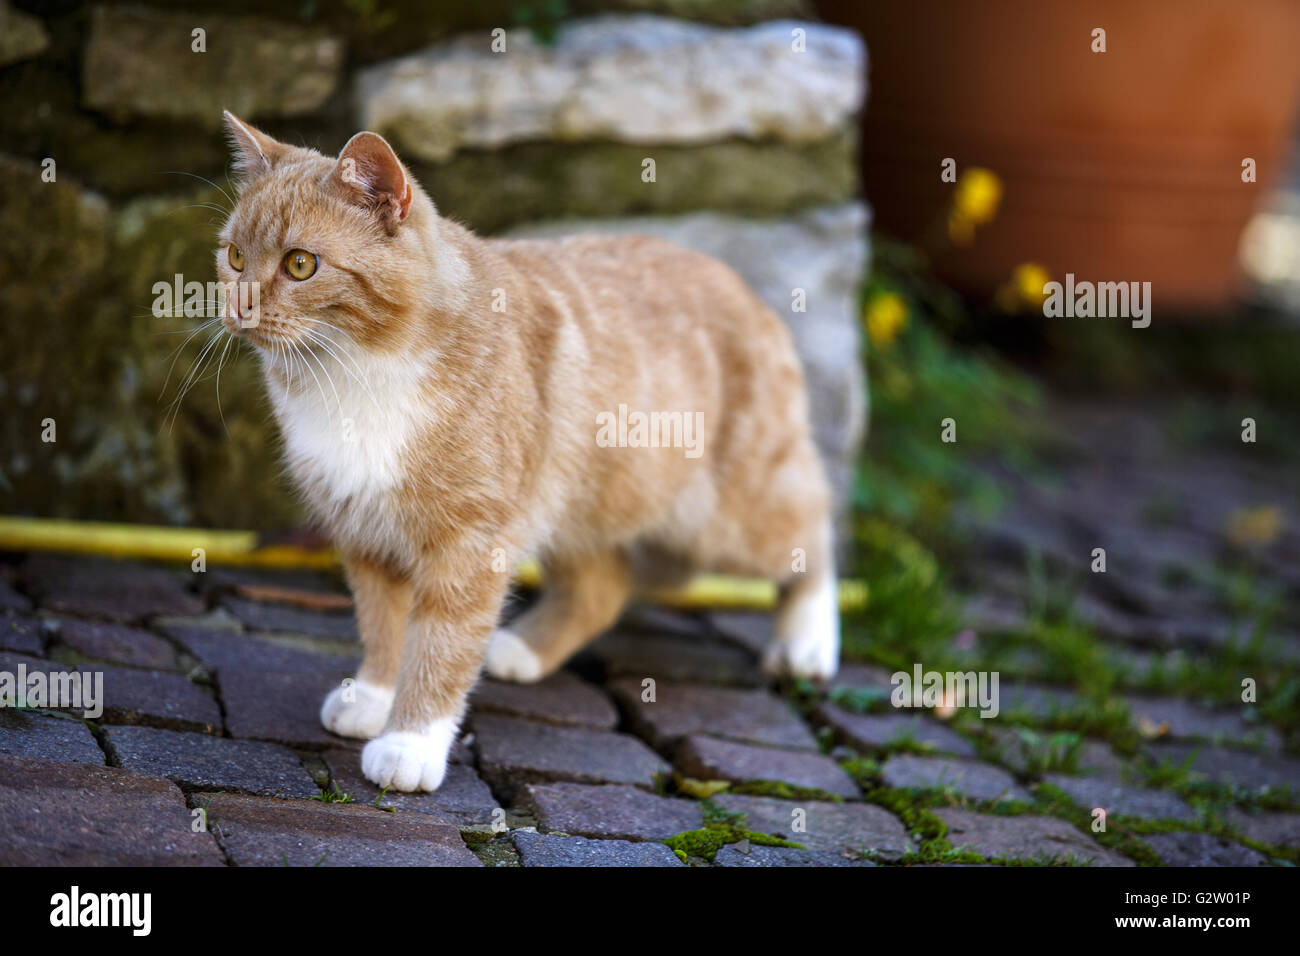 Animal Portrait of a house cat walking the streets Stock Photo